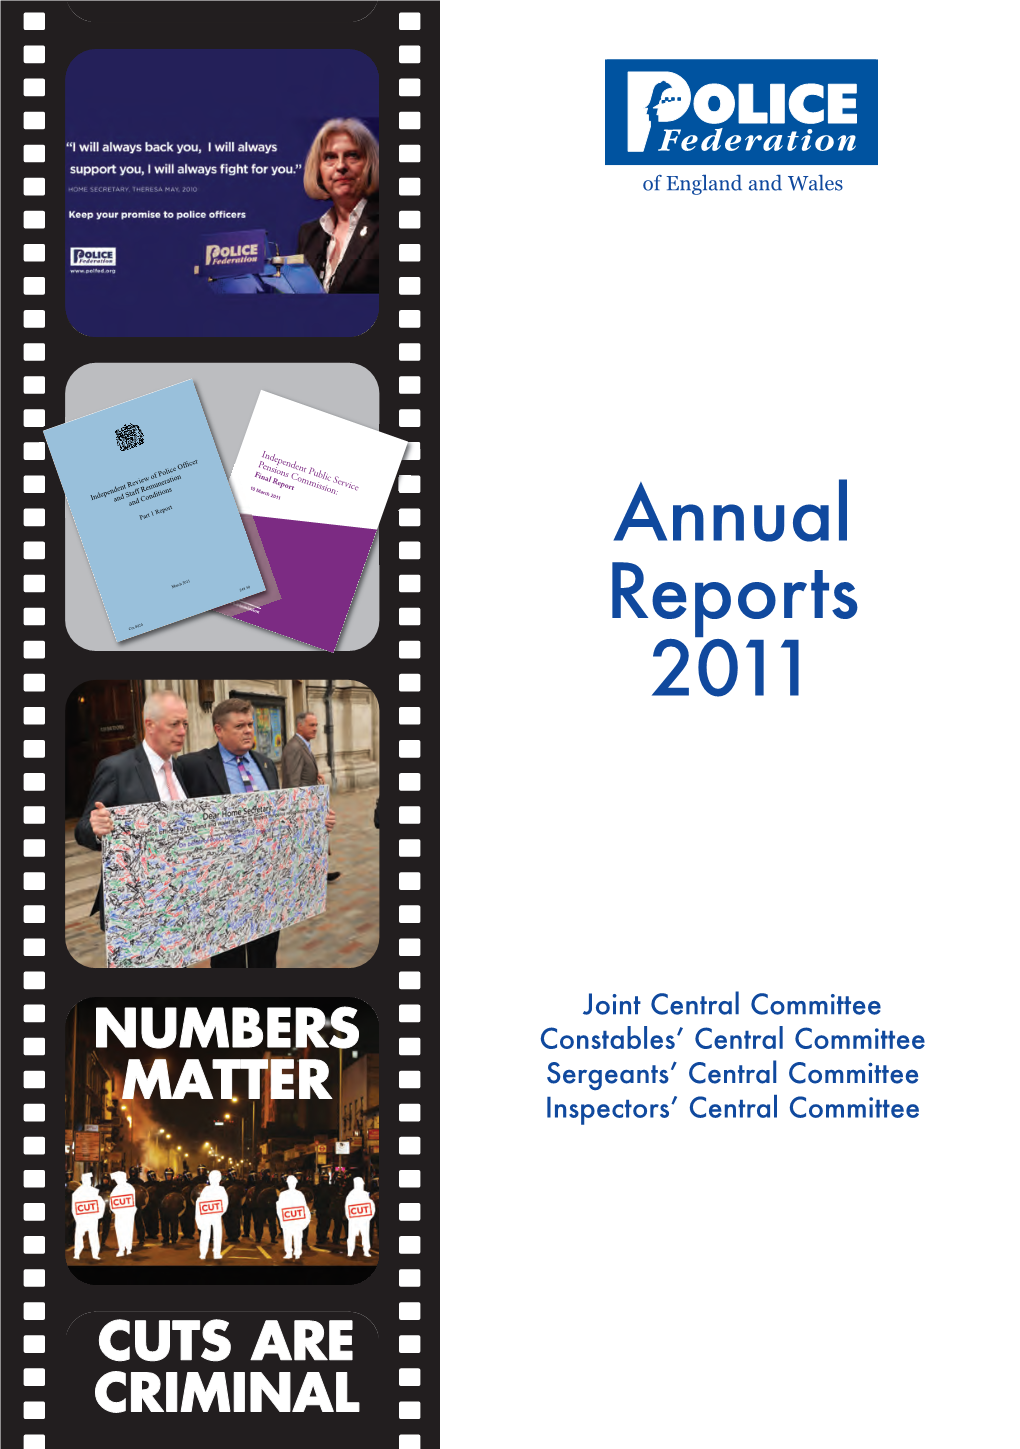 Annual Reports 2011 Reports Annual Federationpolice Annual